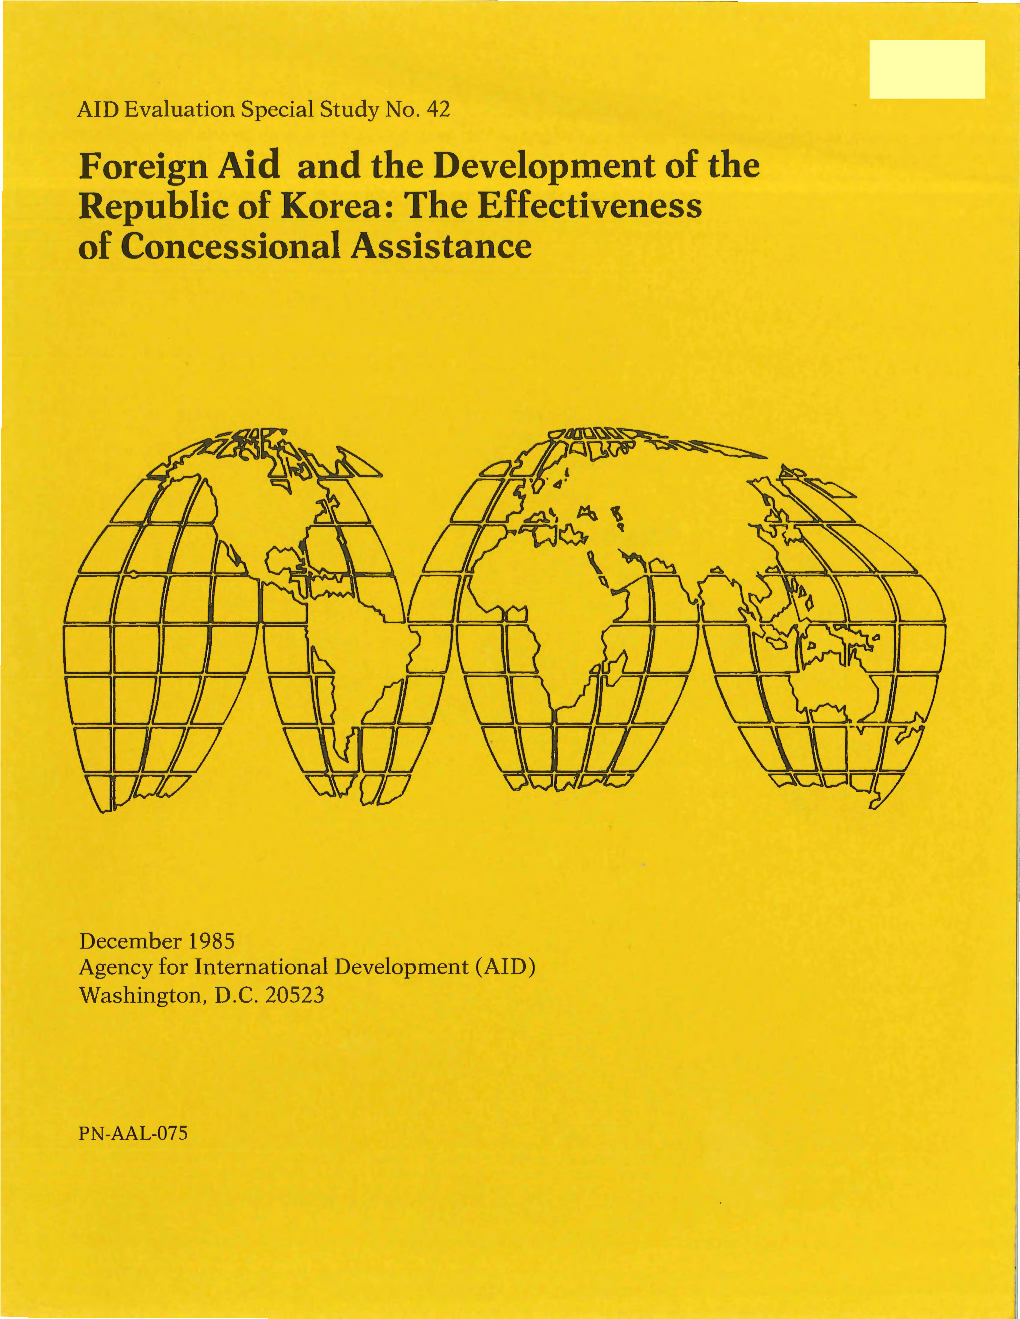 Foreign Aid and the Development of the Republic of Korea: the Effectiveness of Concessional Assistance